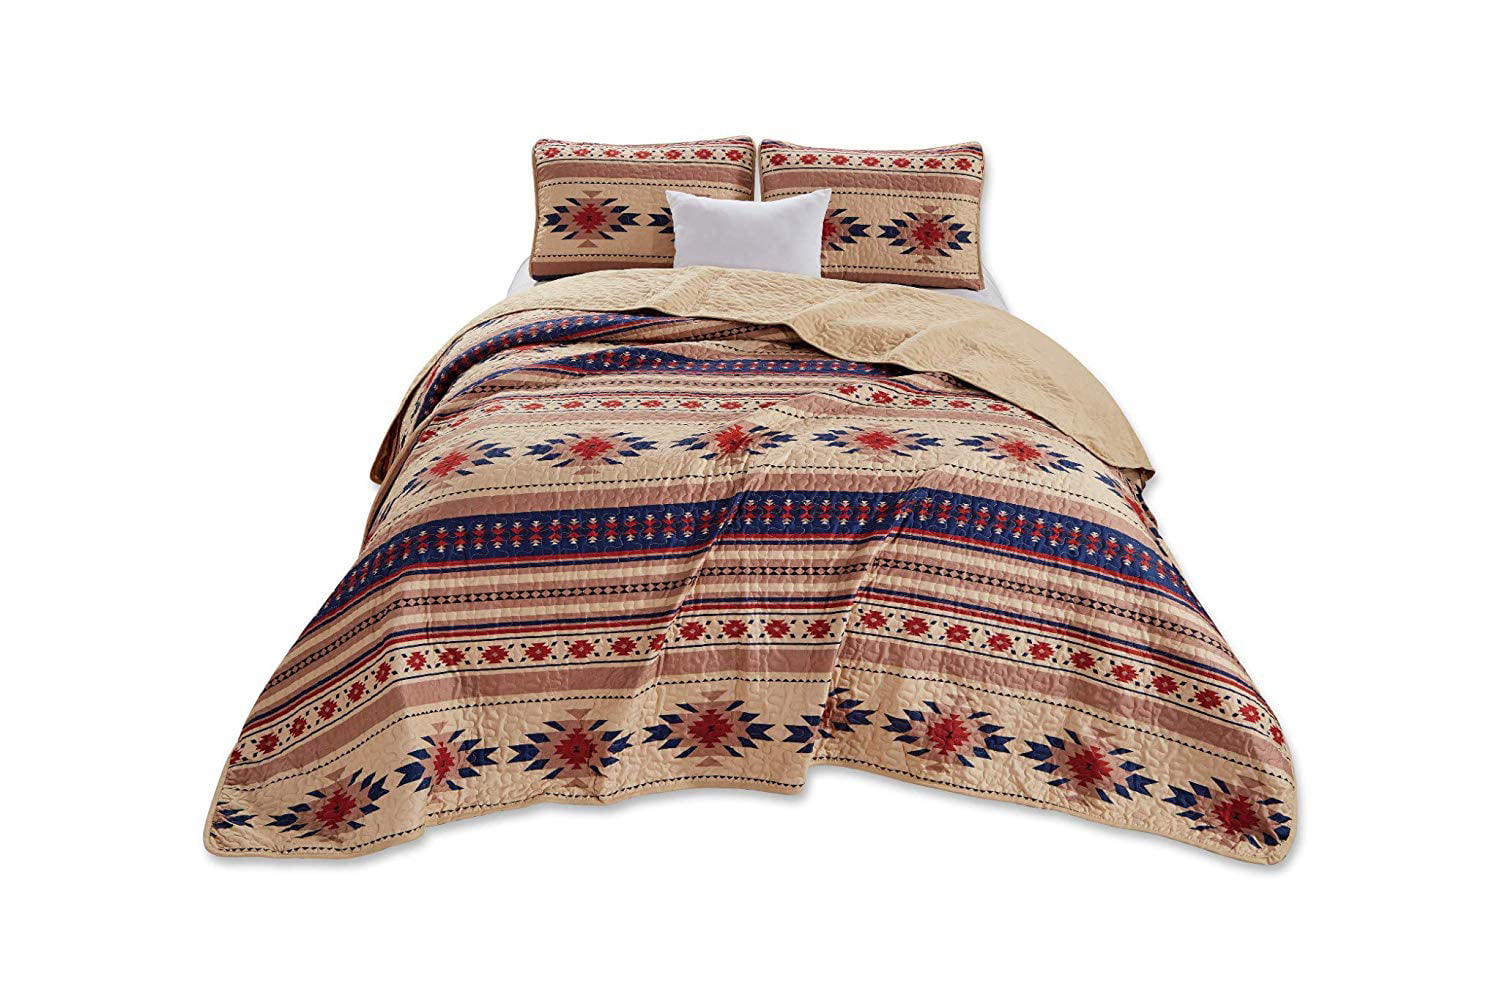 Details about   New Indian Cotton Coverlet Bedding Blanket Screen Printed Kantha Quilt Bedspread 